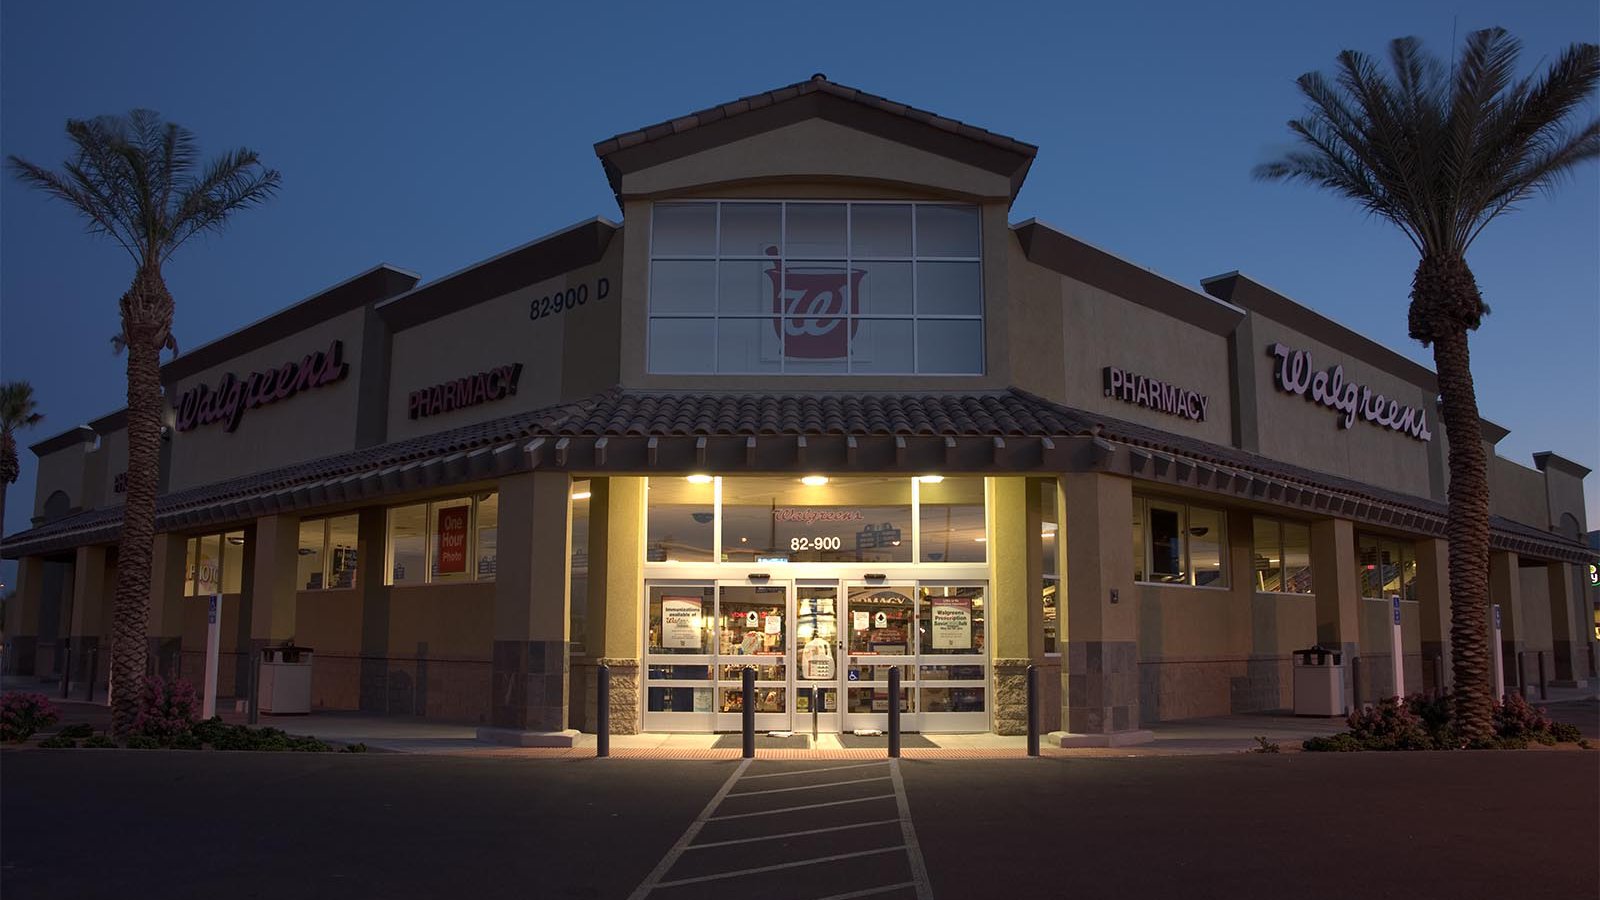 RAW exterior architectural photograph of a Walgreens store at sunrise